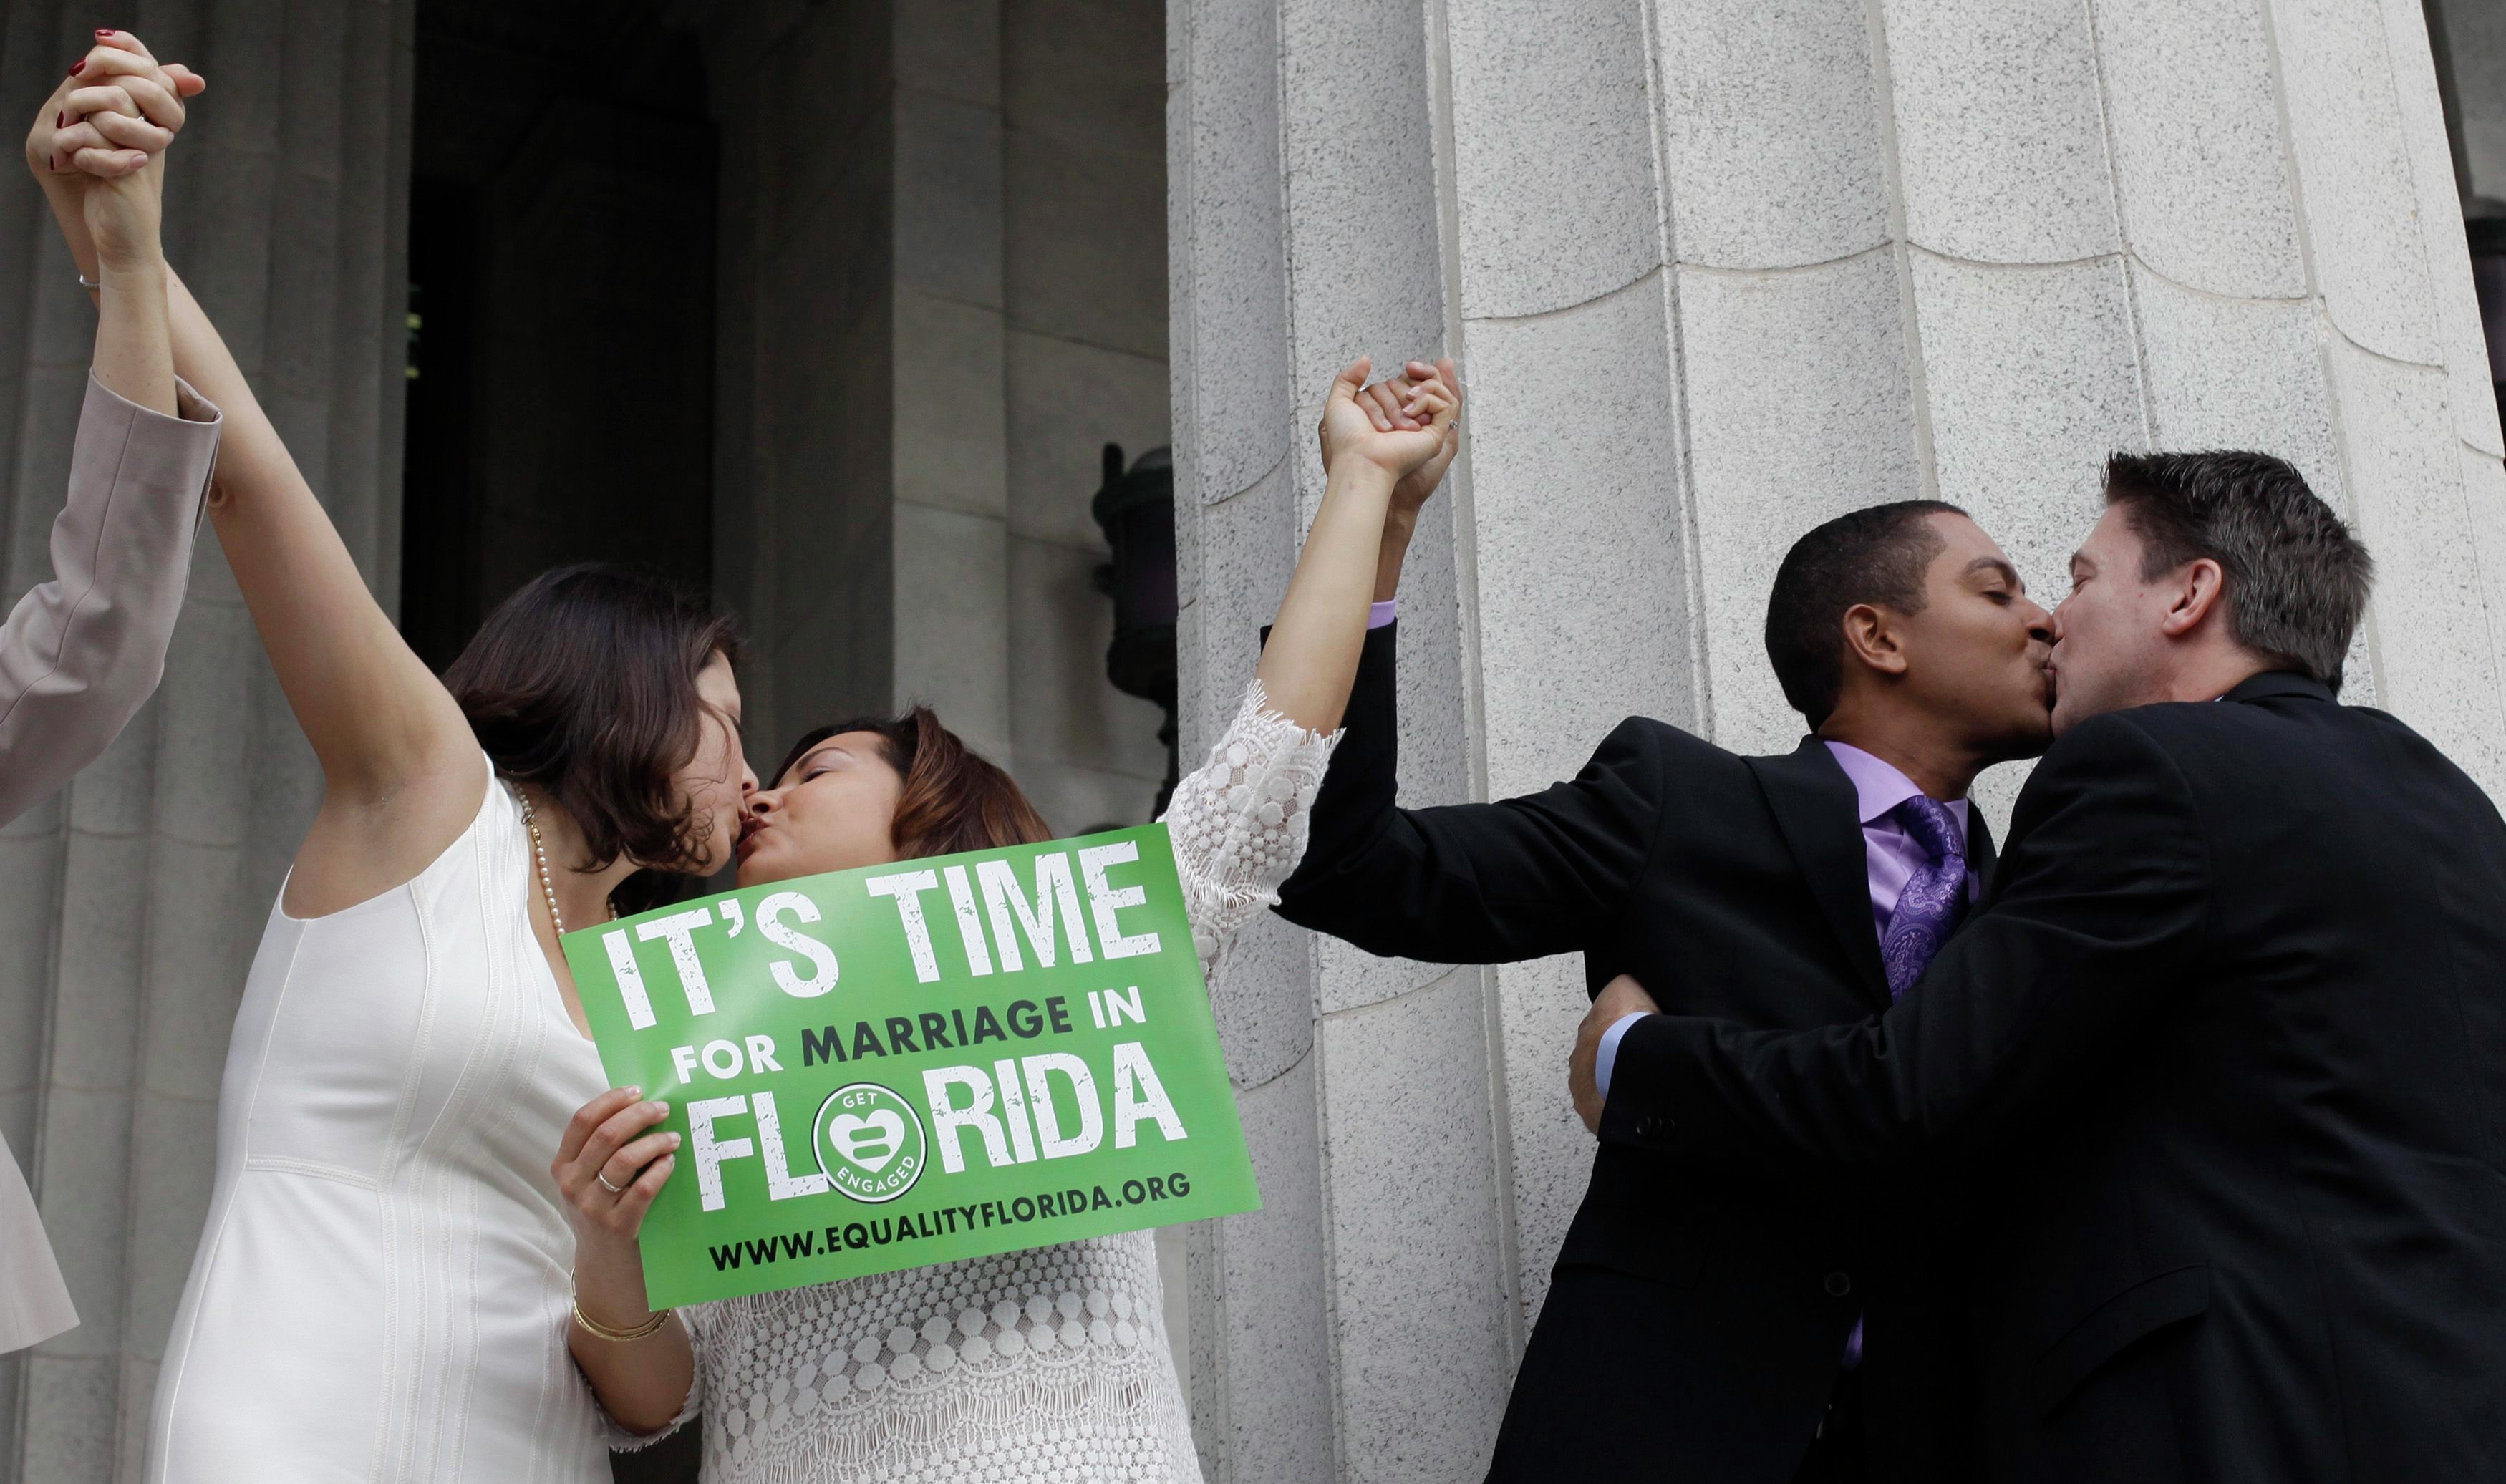 Trial over michigan's gay marriage ban